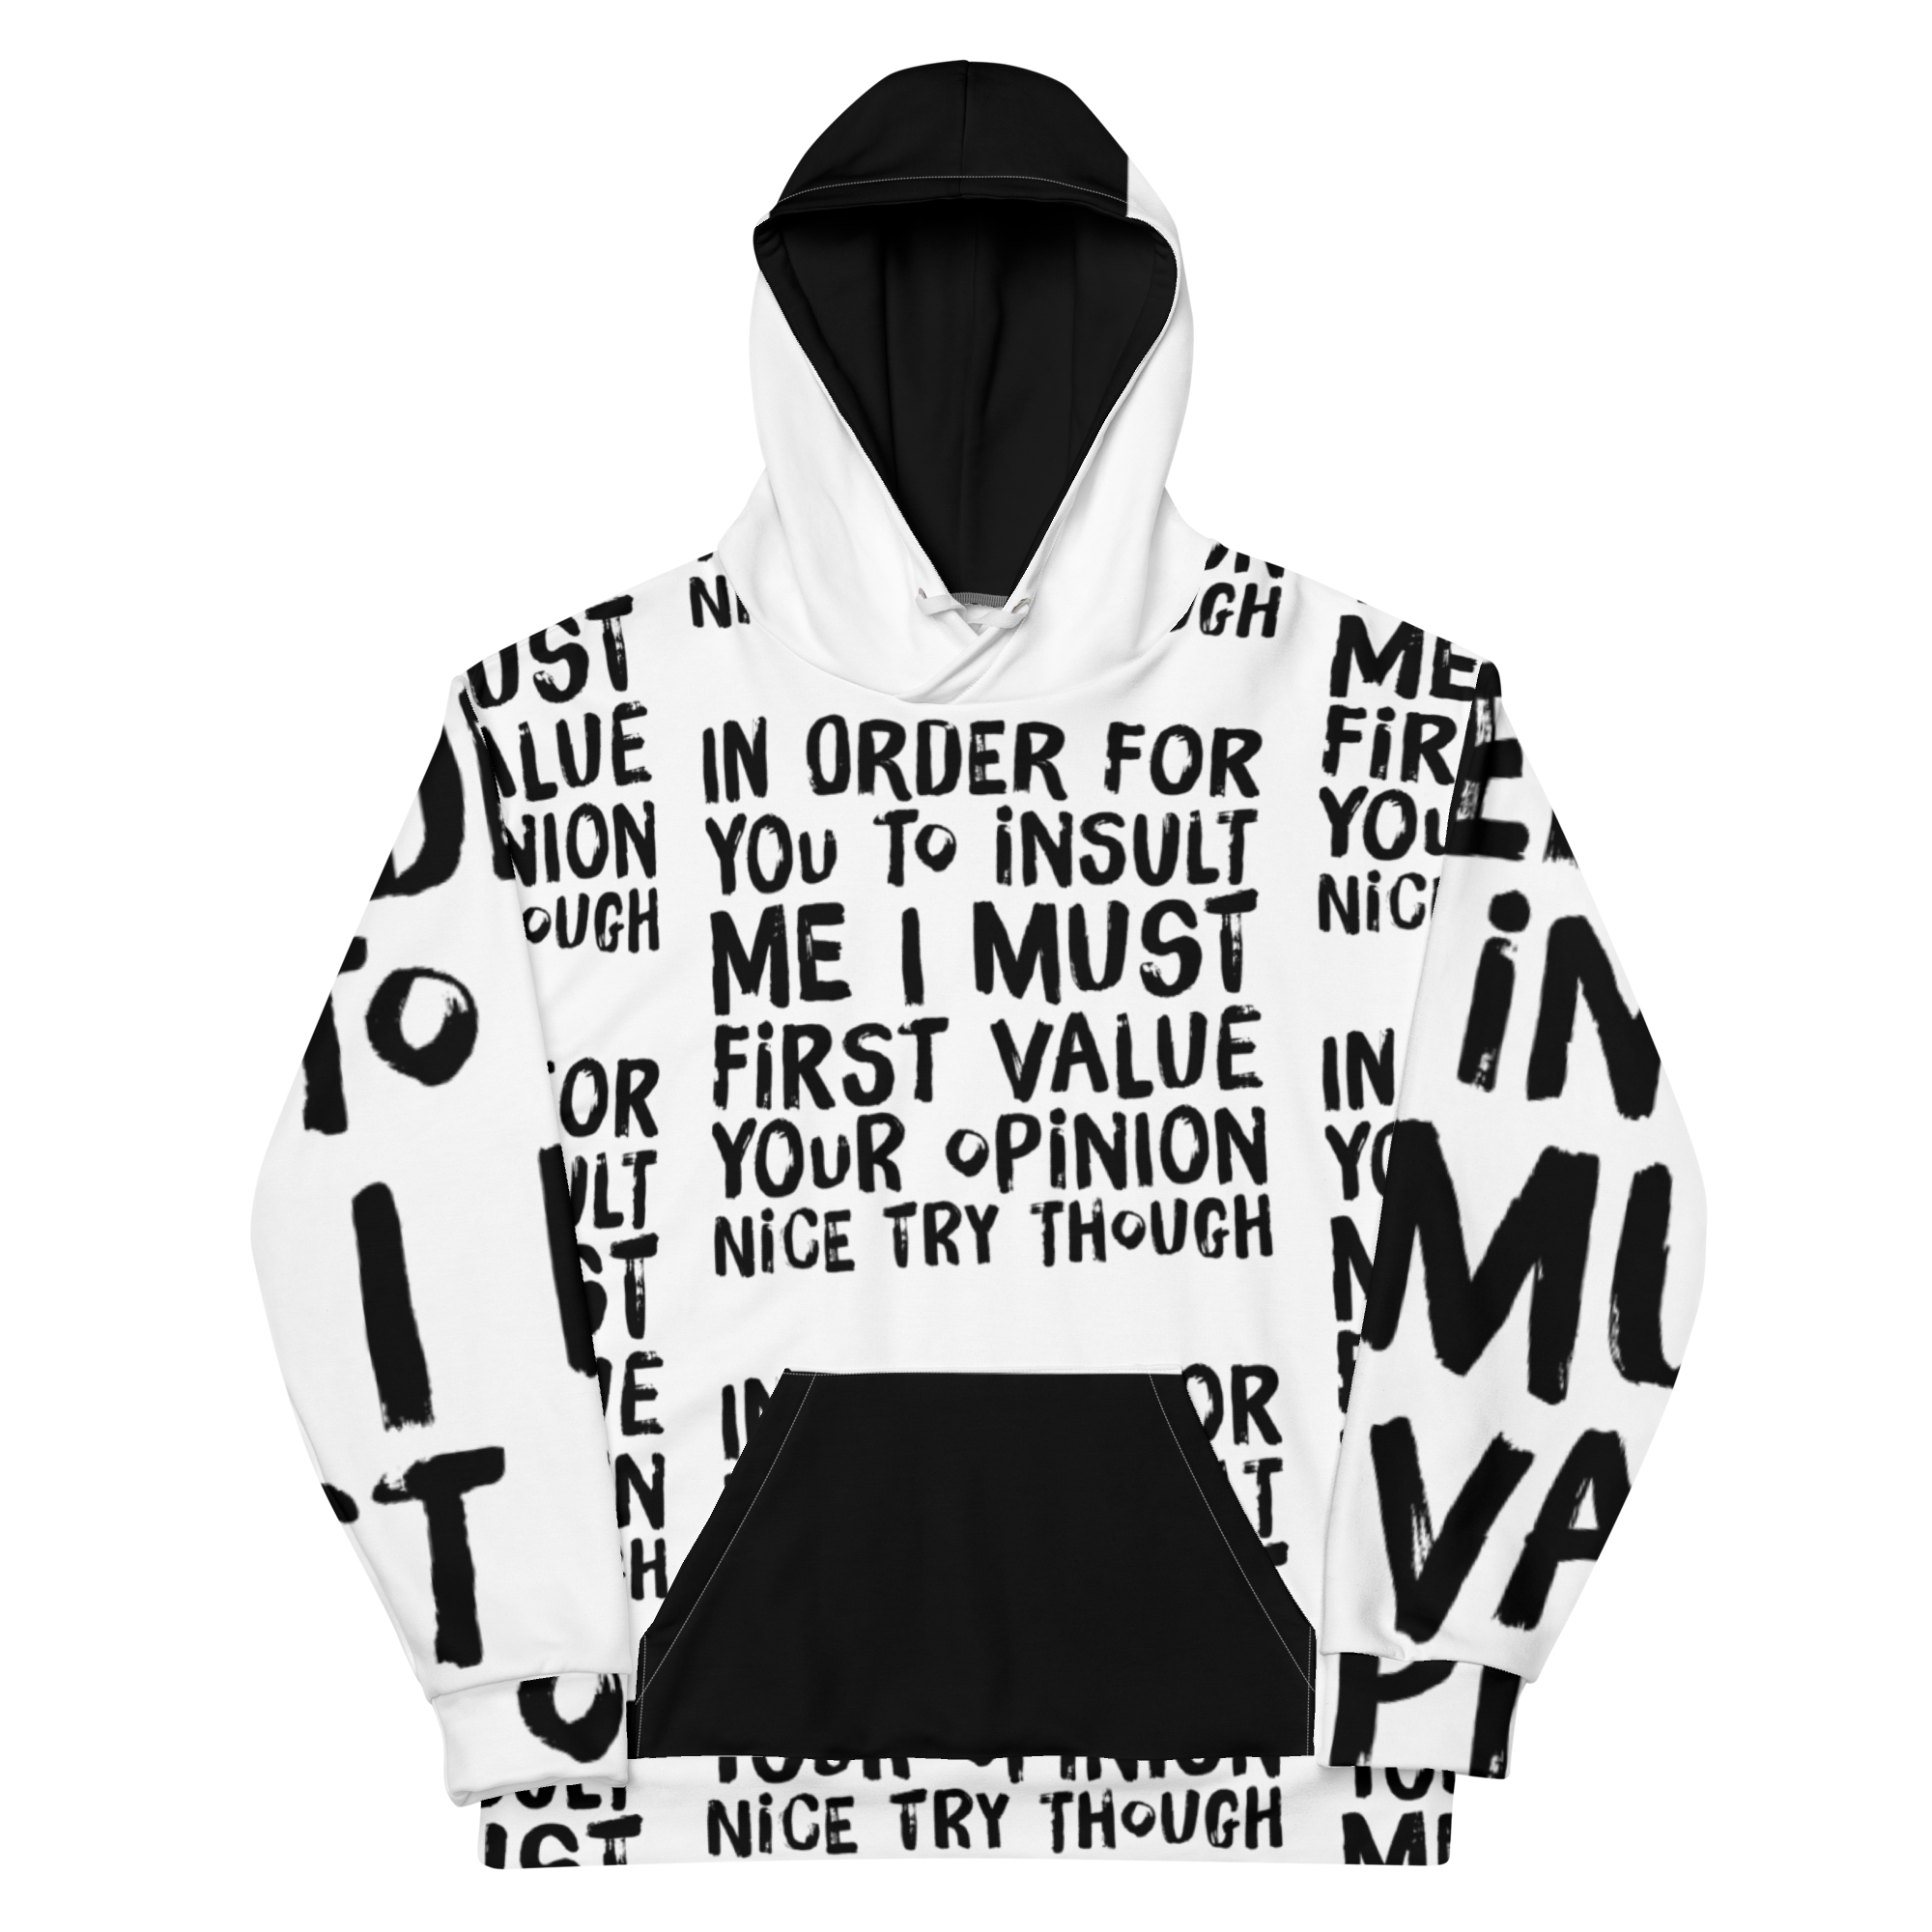 ChillWave Unisex Hoodie front view, showcasing the 'In order for you to insult me, I must first value your opinion... nice try though' text in vibrant black ink on white, with a stylish black front pocket and hood interior.